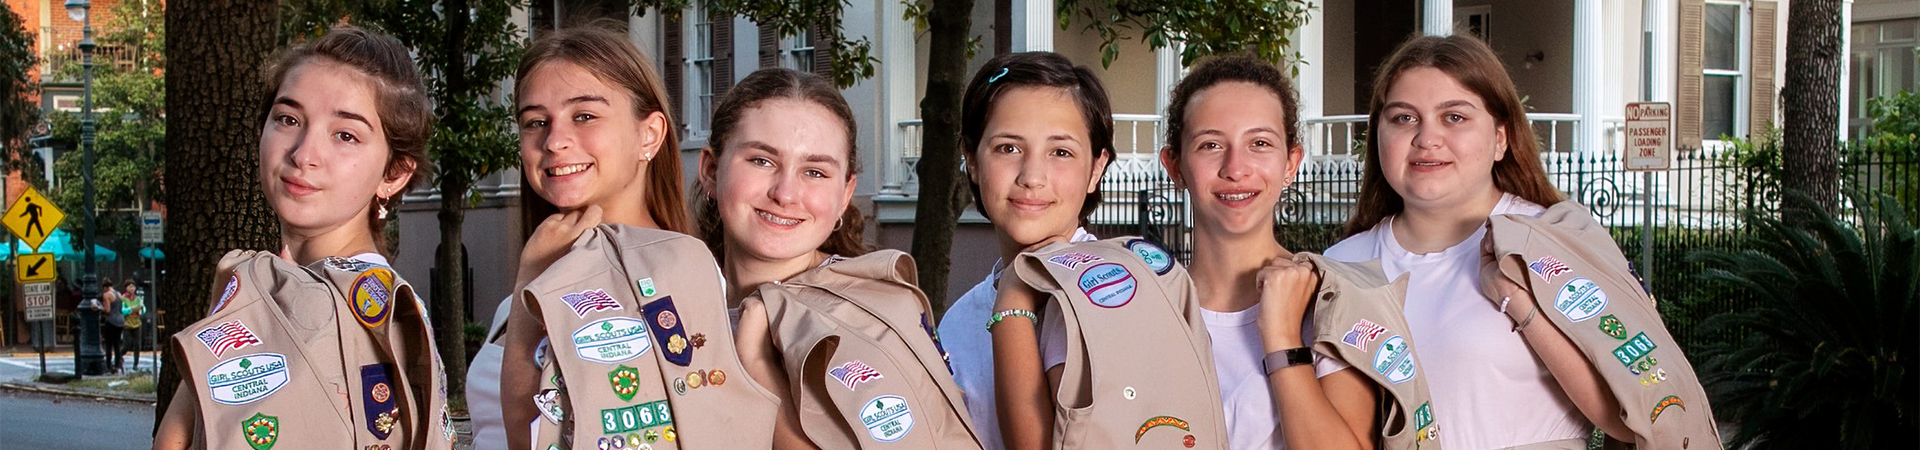  Six Girl Scouts posing with vests over their shoulders outside the Juliette Gordon Low Birthplace Museum. 